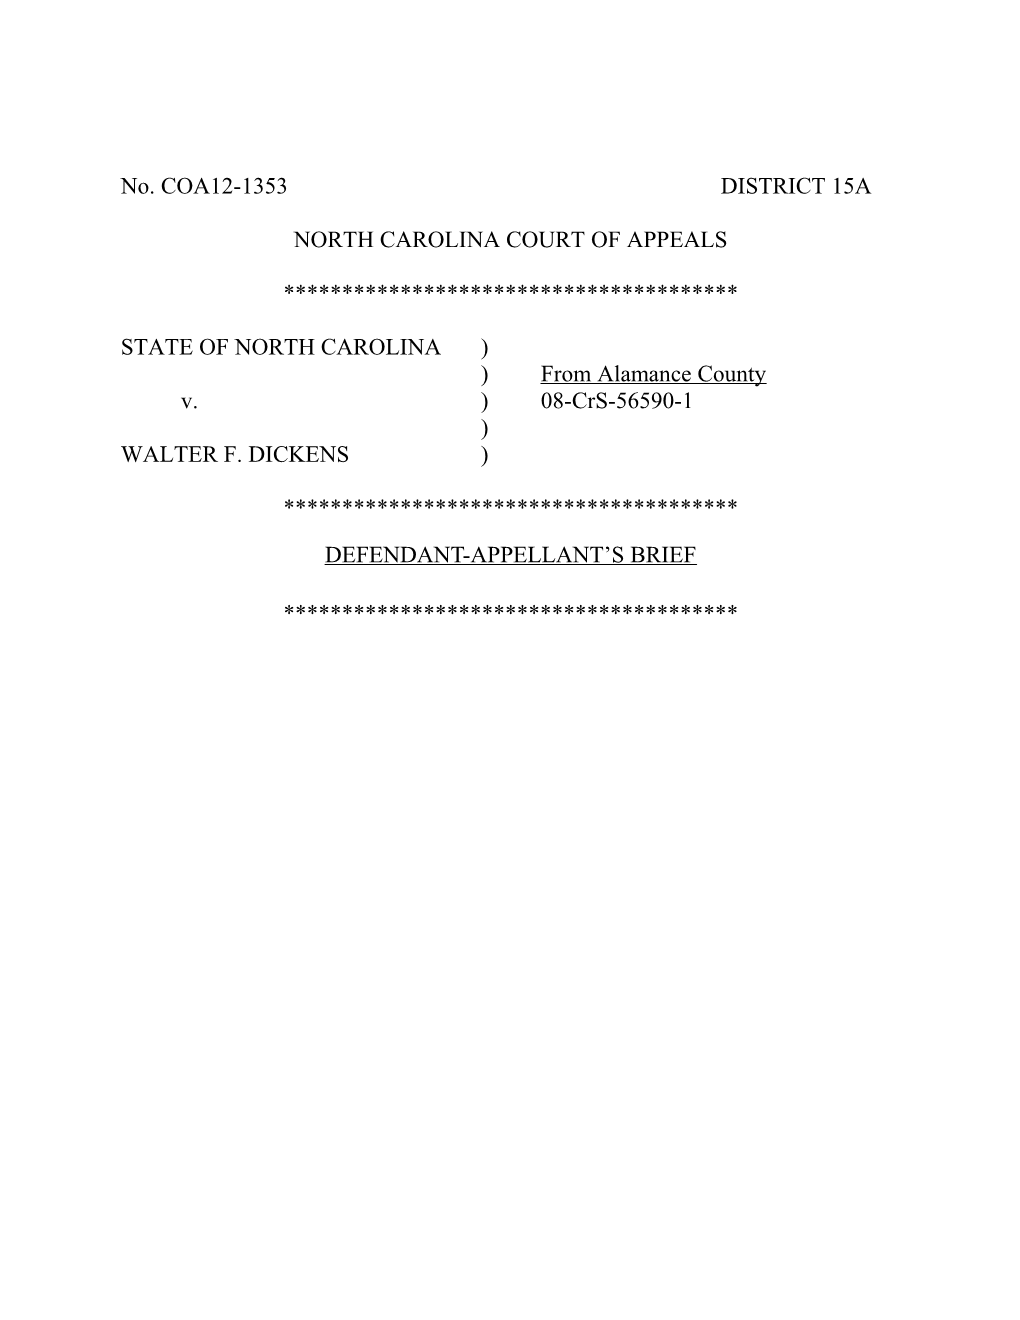 Statement of the Grounds for Appellate Review